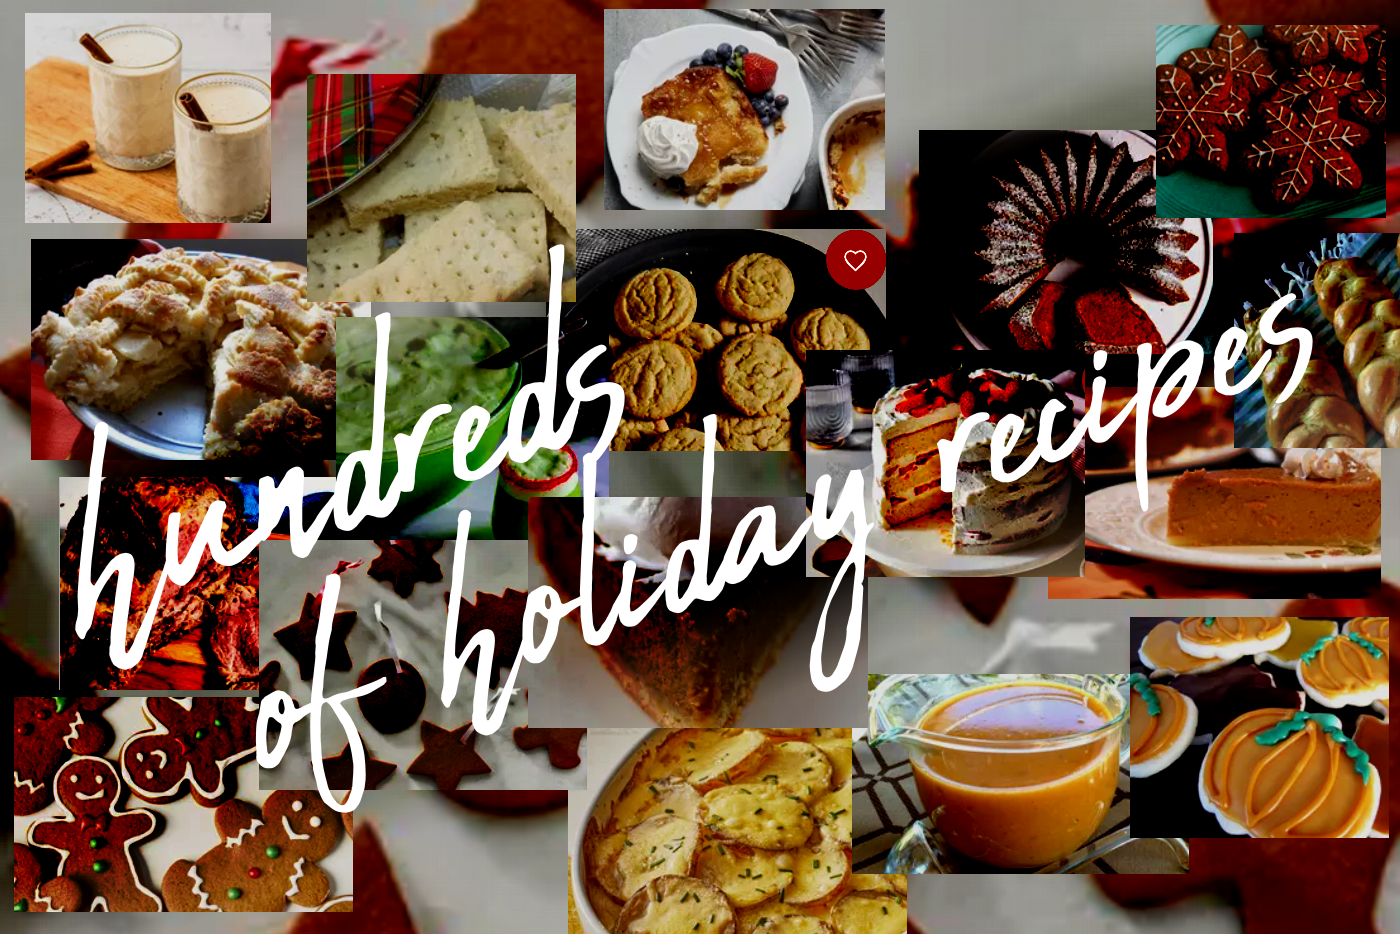 Hundreds of recipes and food ideas for the holidays